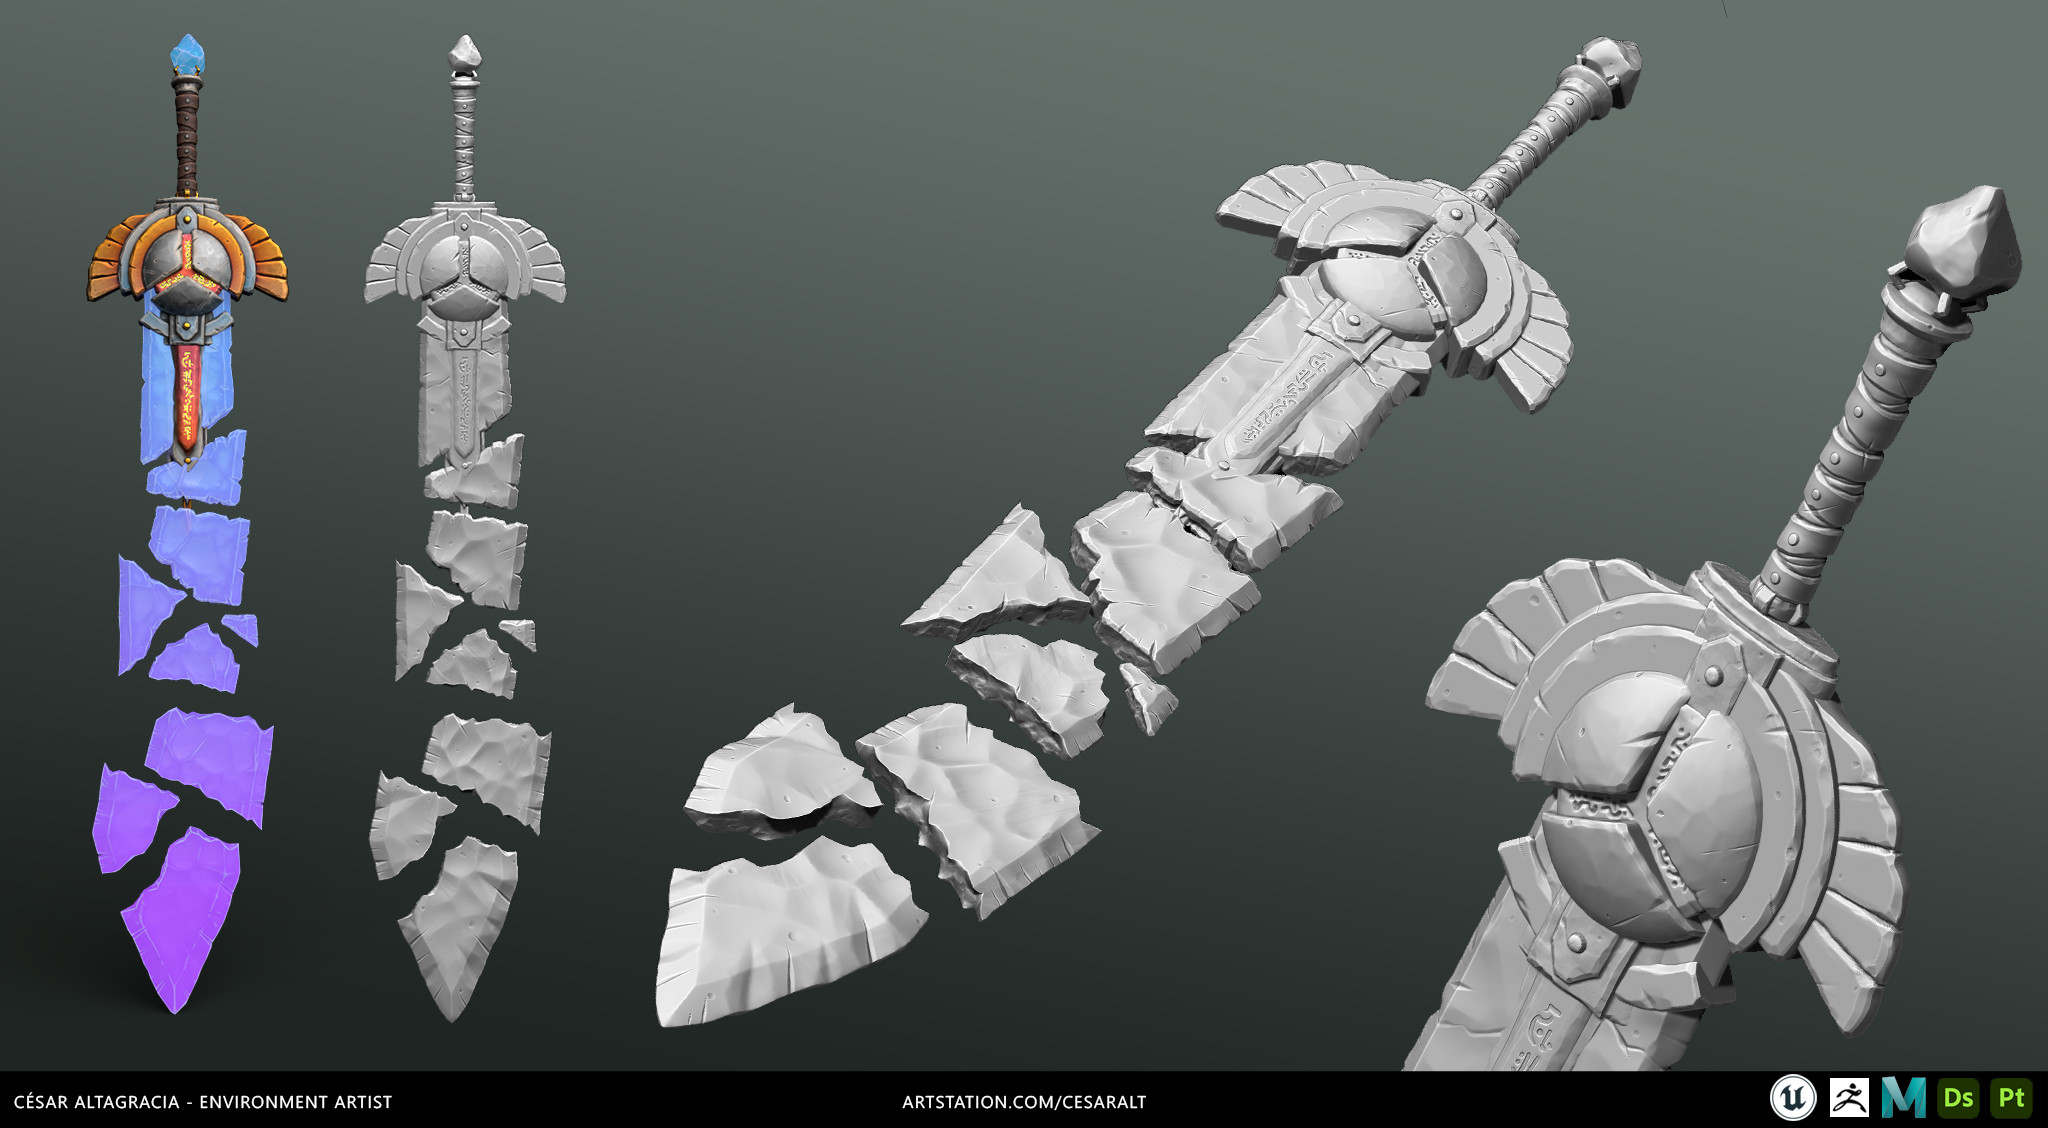 Crystal sword ZBrush sculpt and its low poly counterpart textured in Substance Painter.